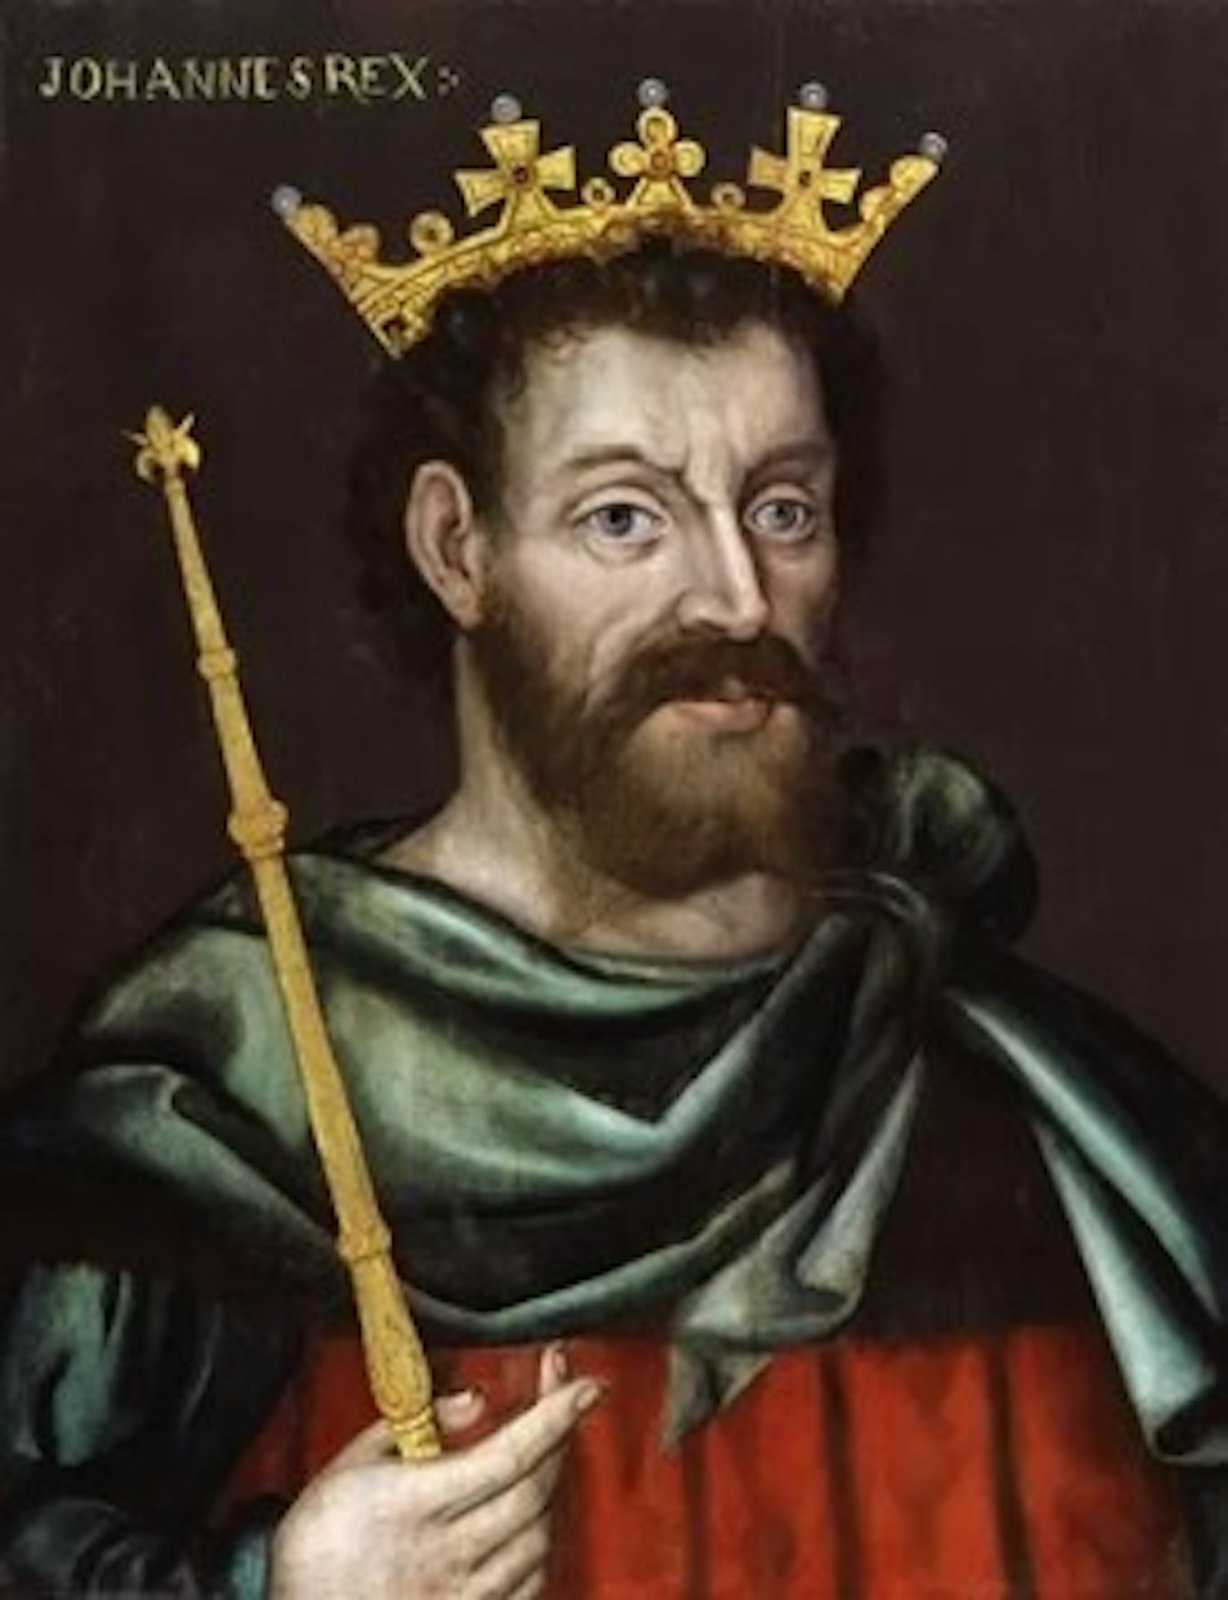 "Johannes Rex" is the name seen in the upper left corner of this painting of John Lackland, King of England, 1199-1216. (Artist unknown, created c. 1597-1618, National Portrait Gallery in London)